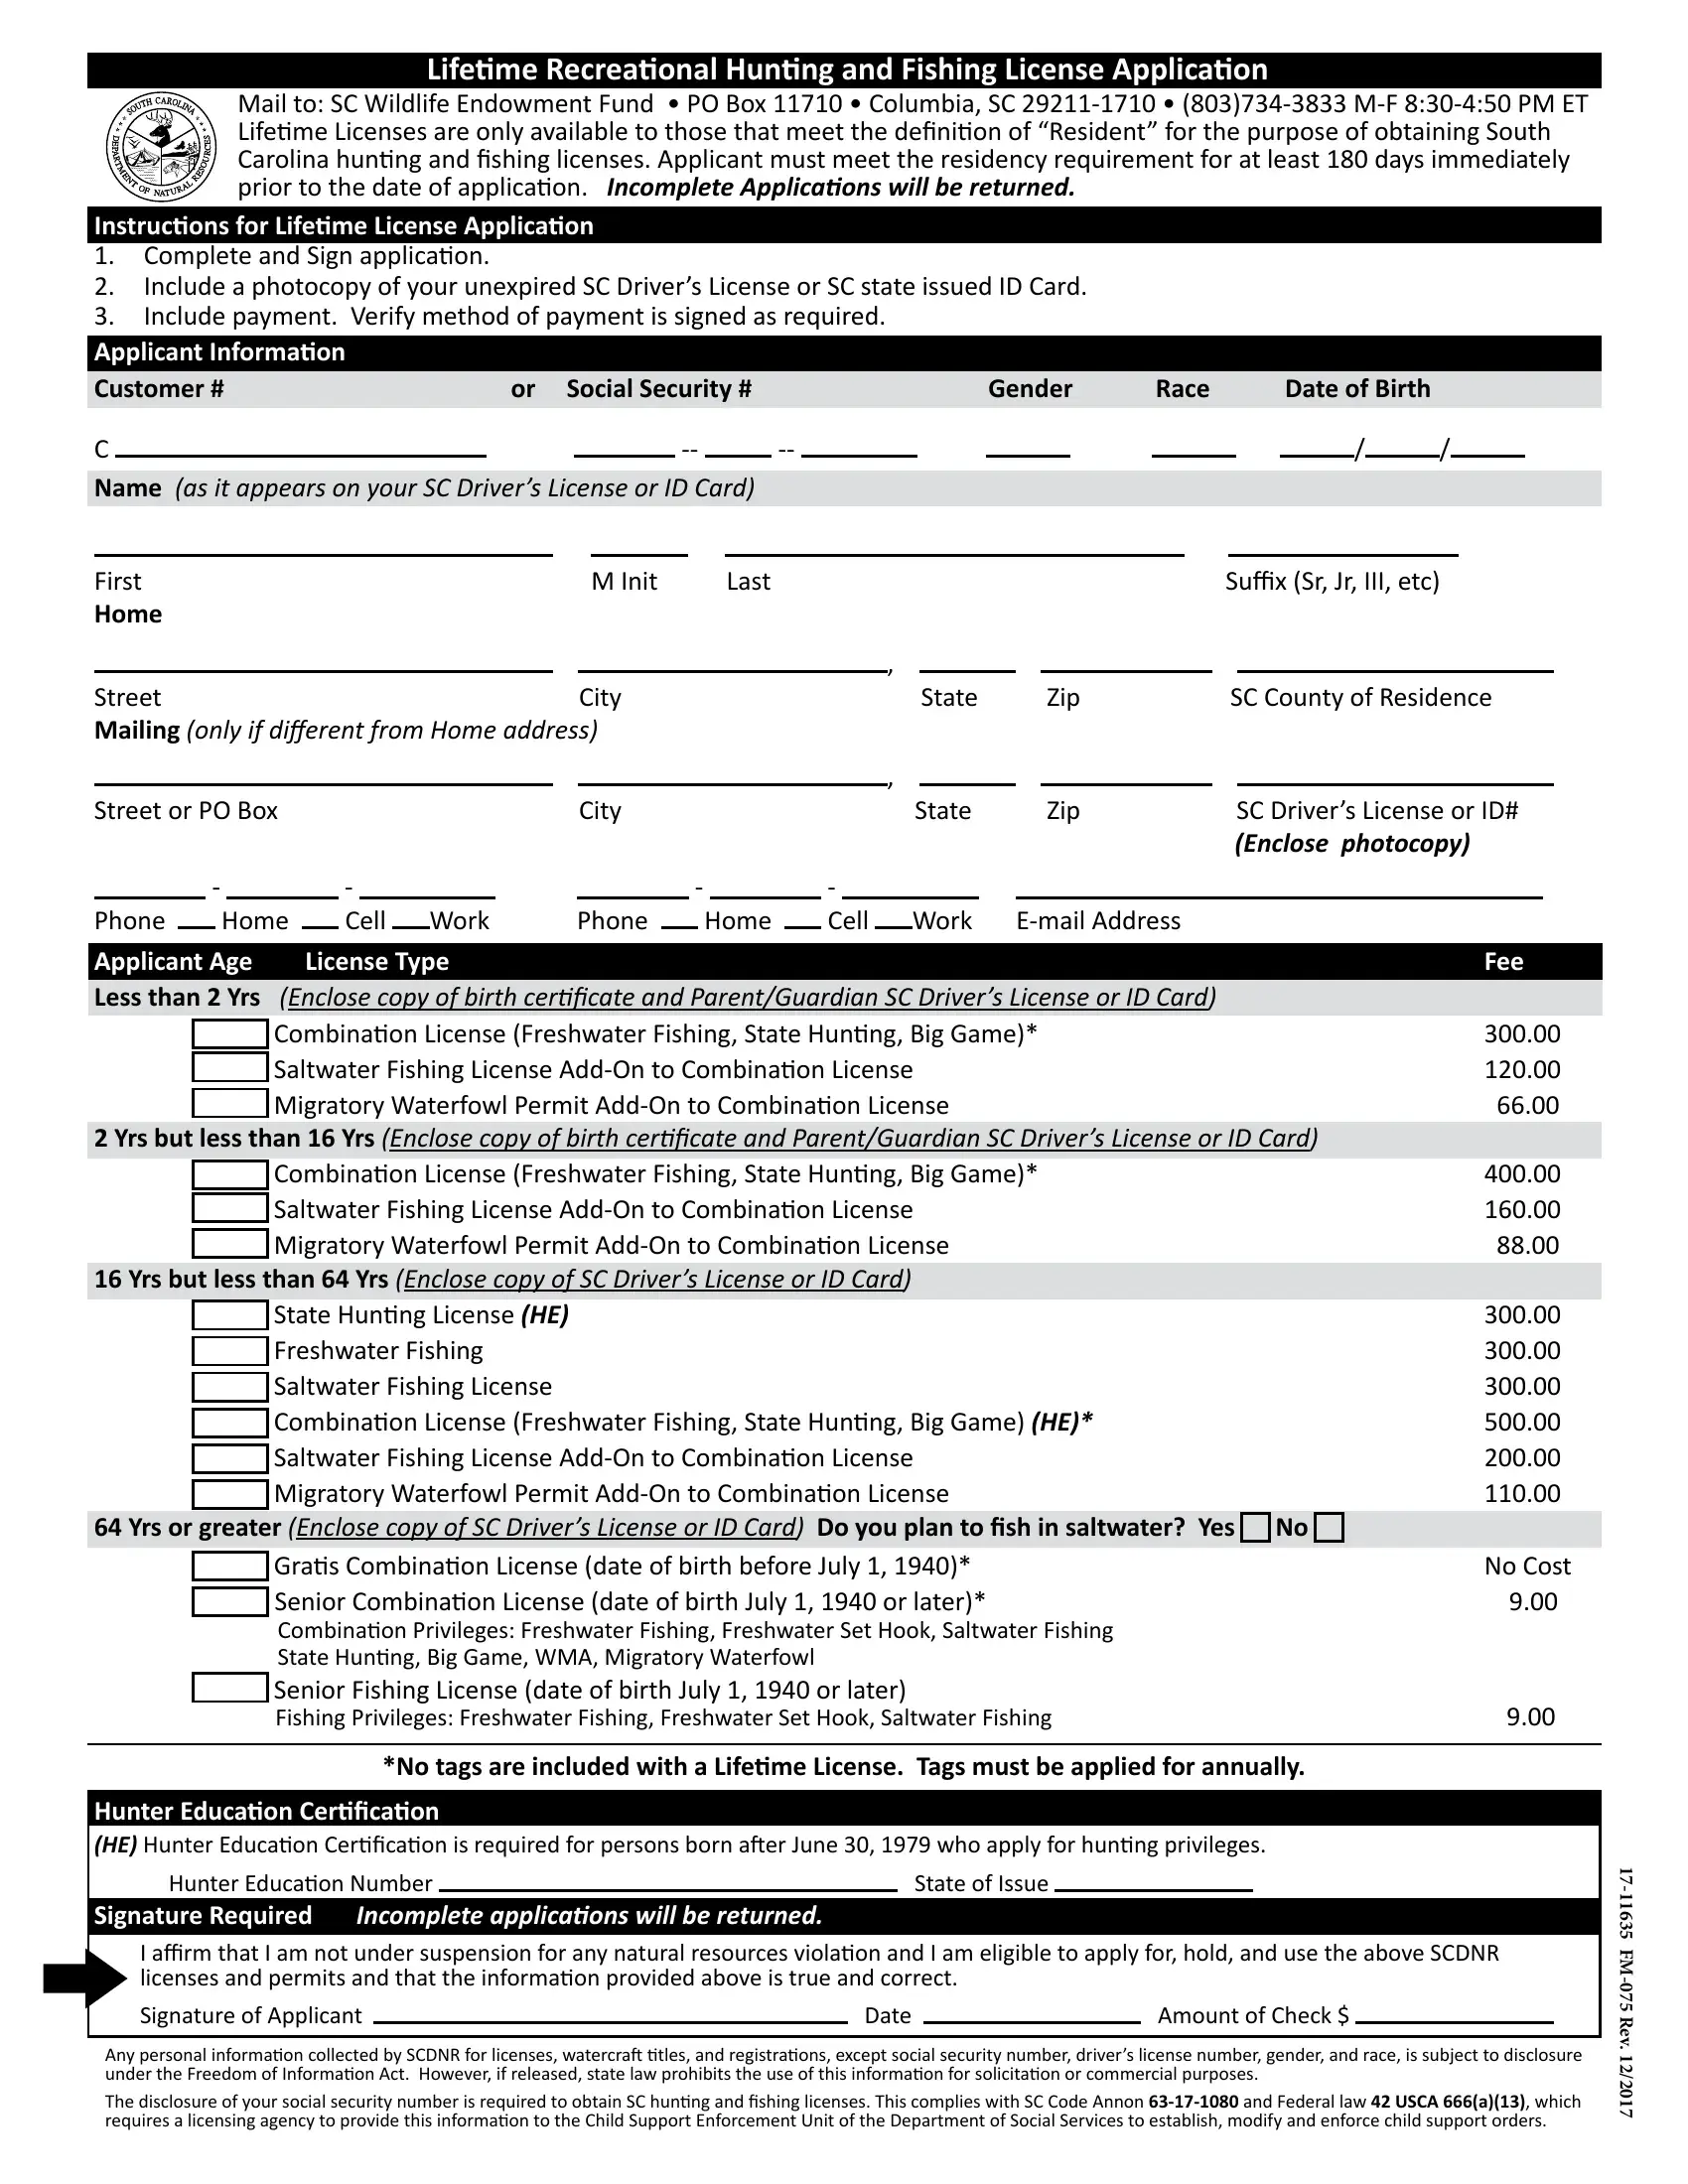 Fishing License Application Form Preview